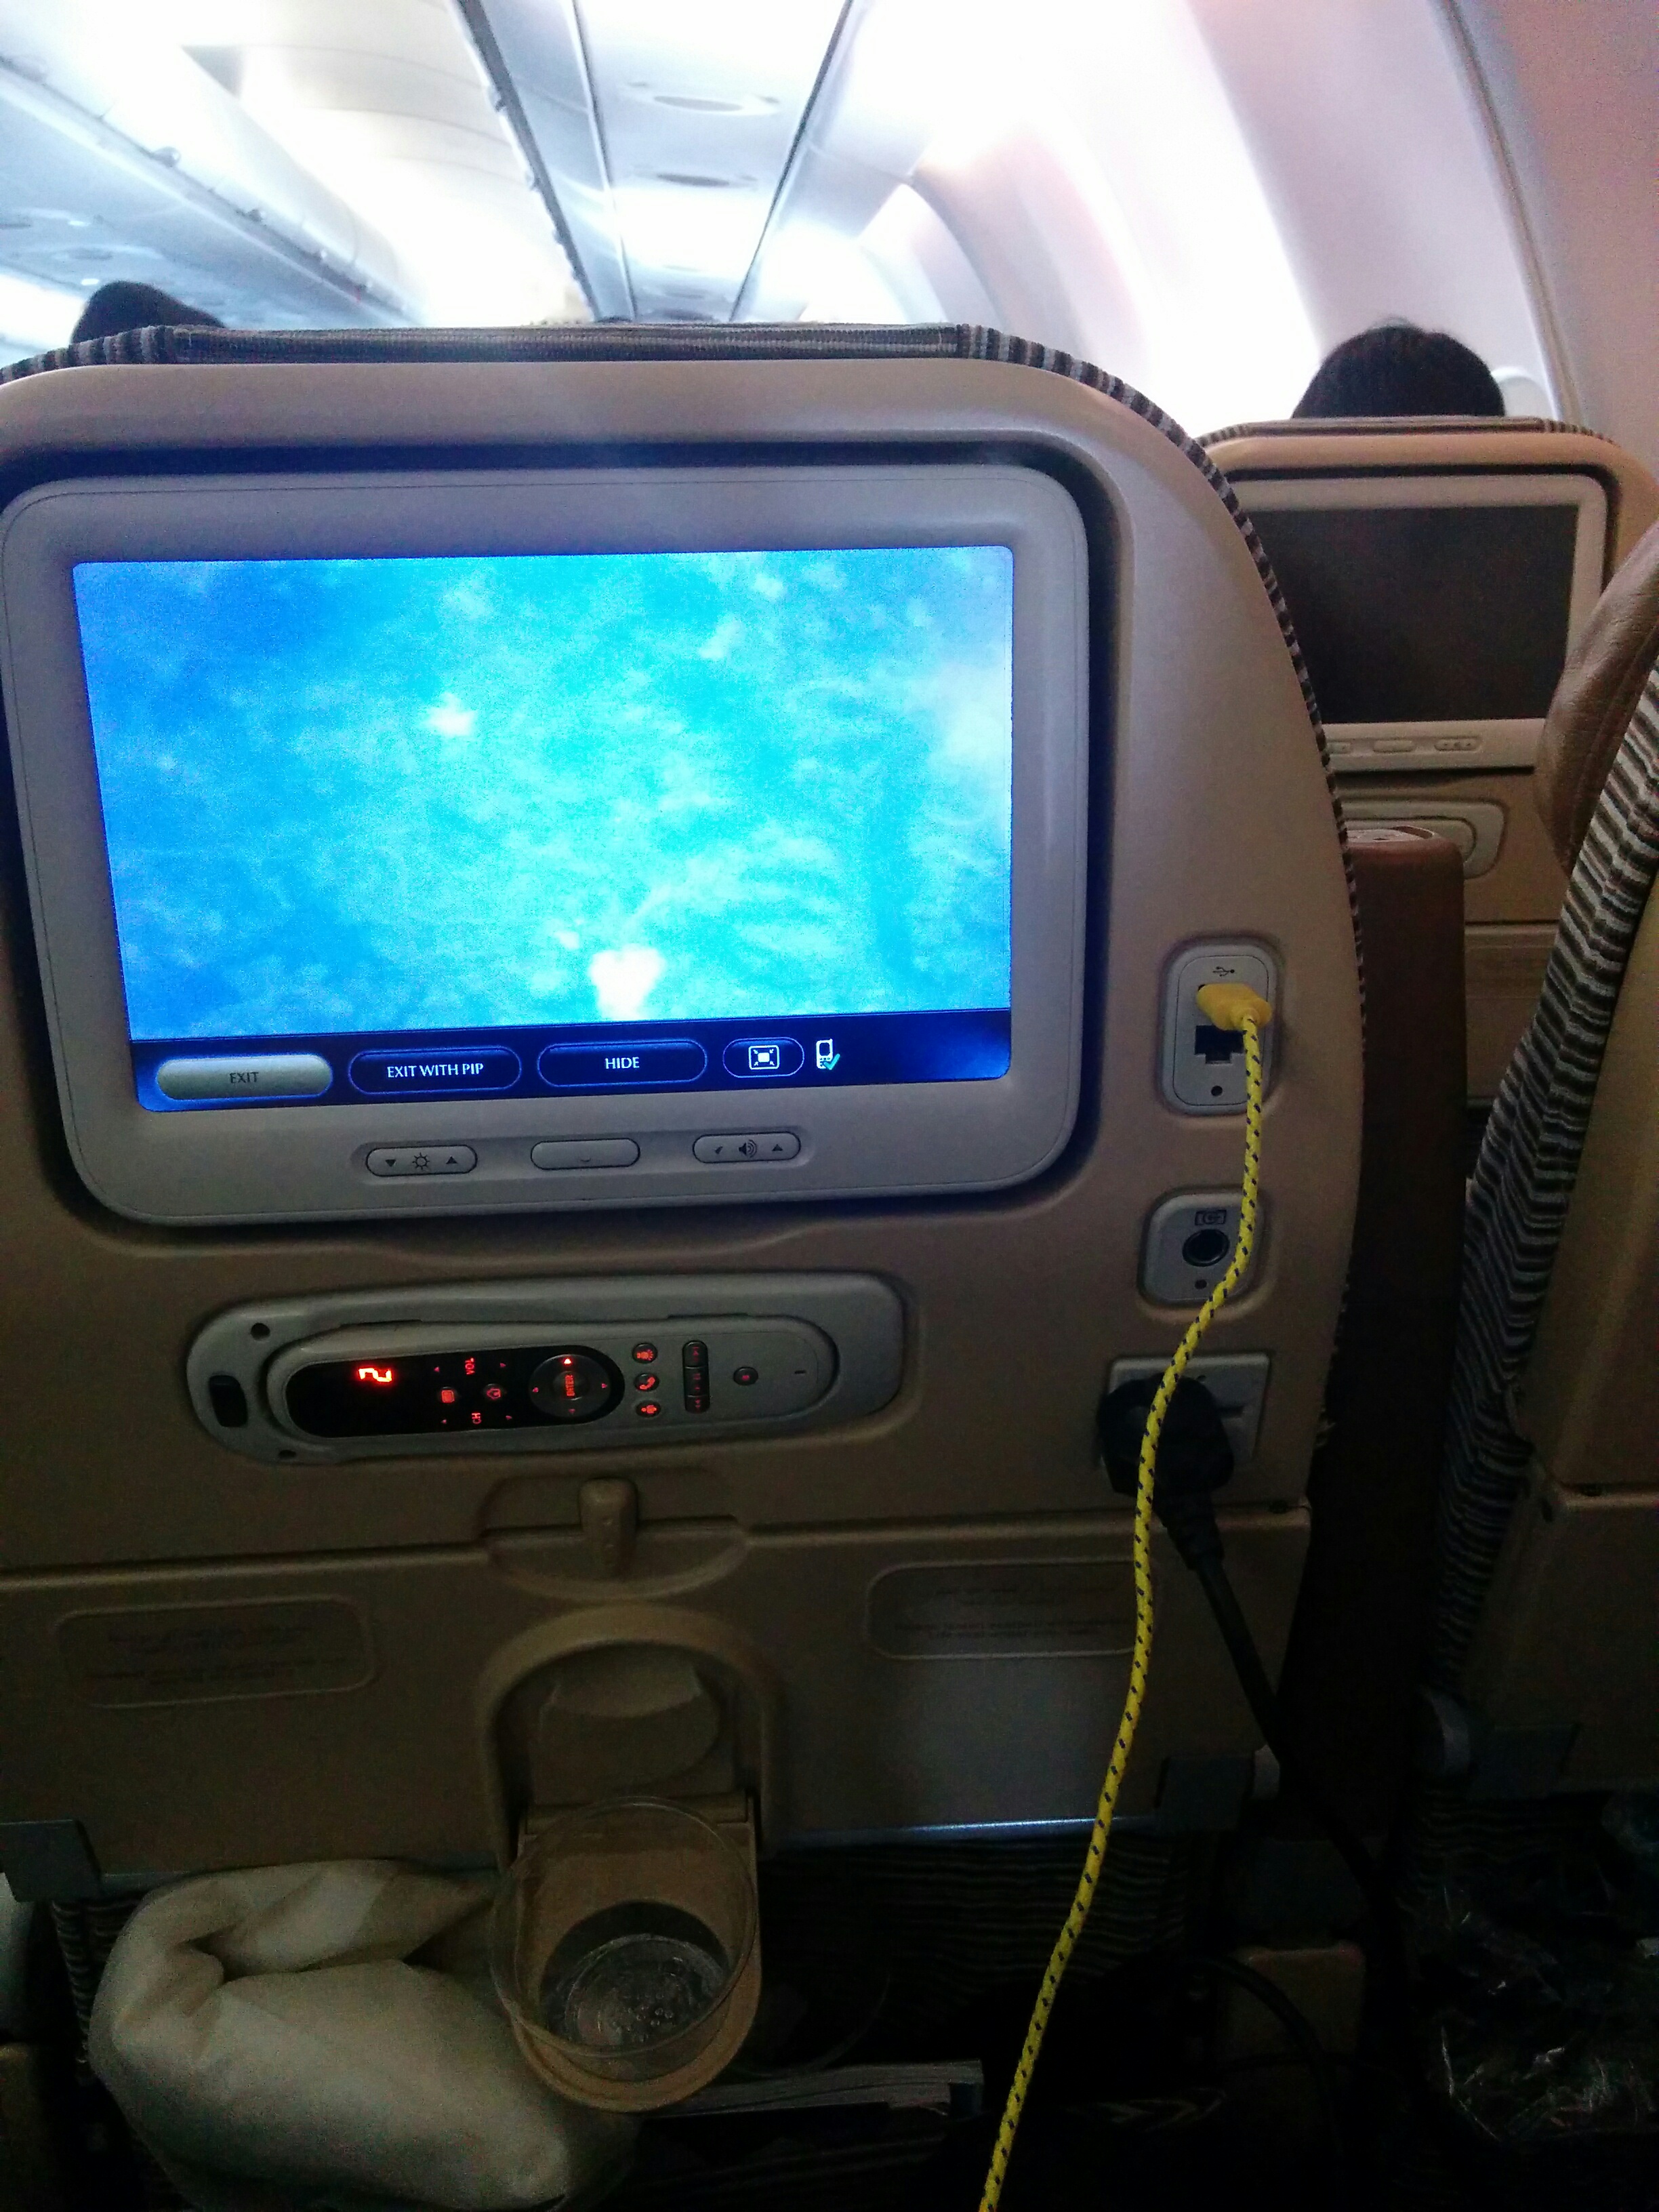 We fley with Etihad airways. Very nice that they have USB and 